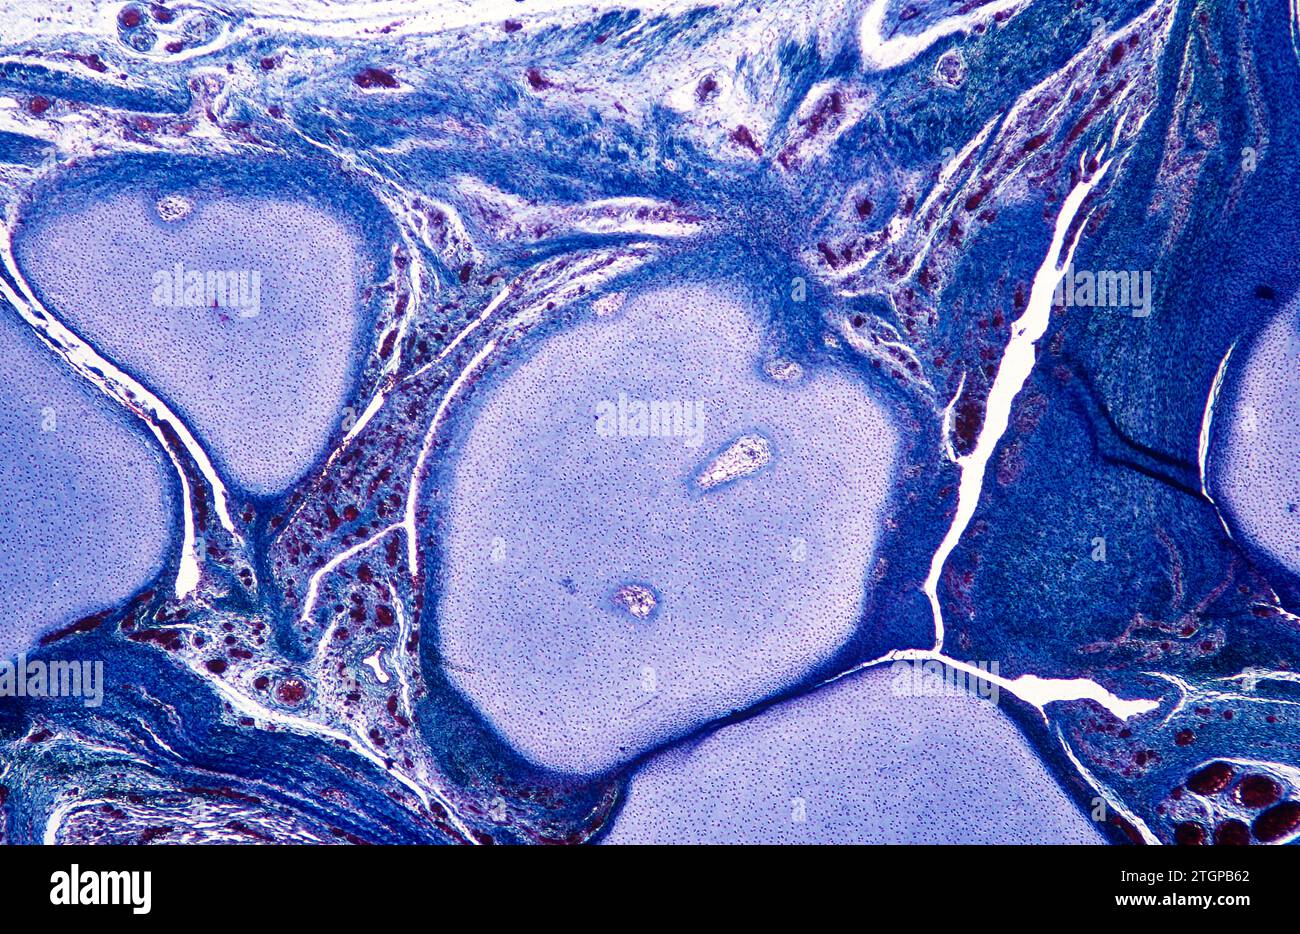 Cartilage in ossification process. Photomicrograph. Stock Photo